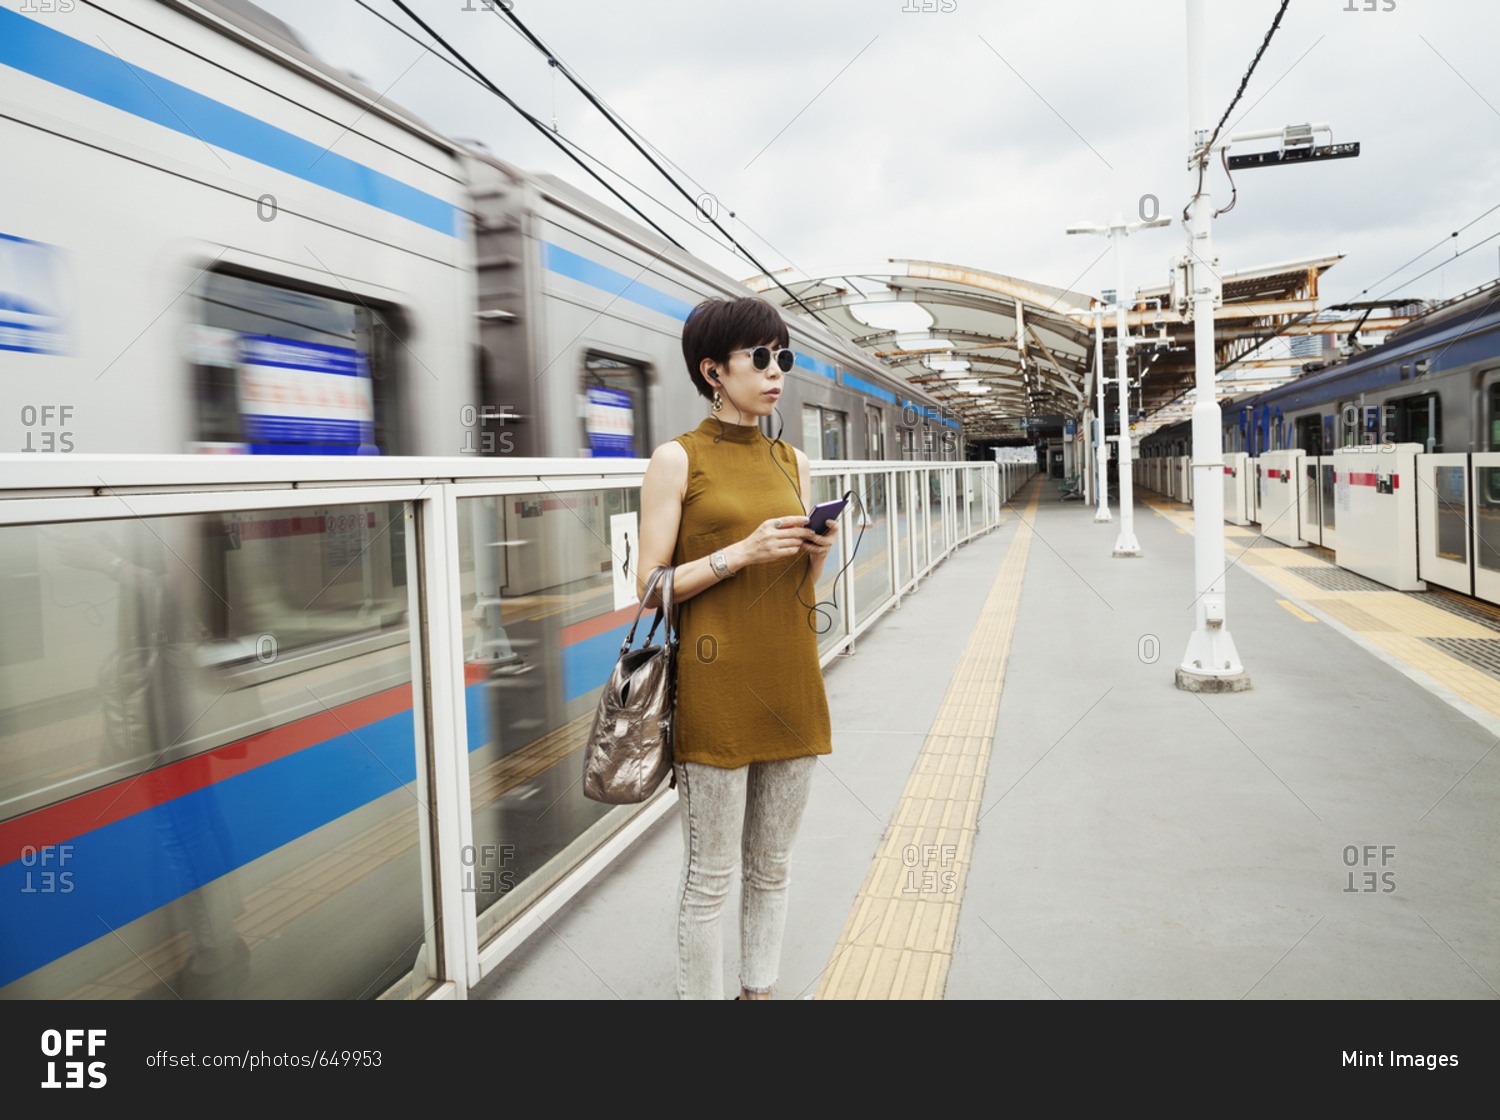 Woman wearing sunglasses standing on the platform of a subway station, Tokyo commuter